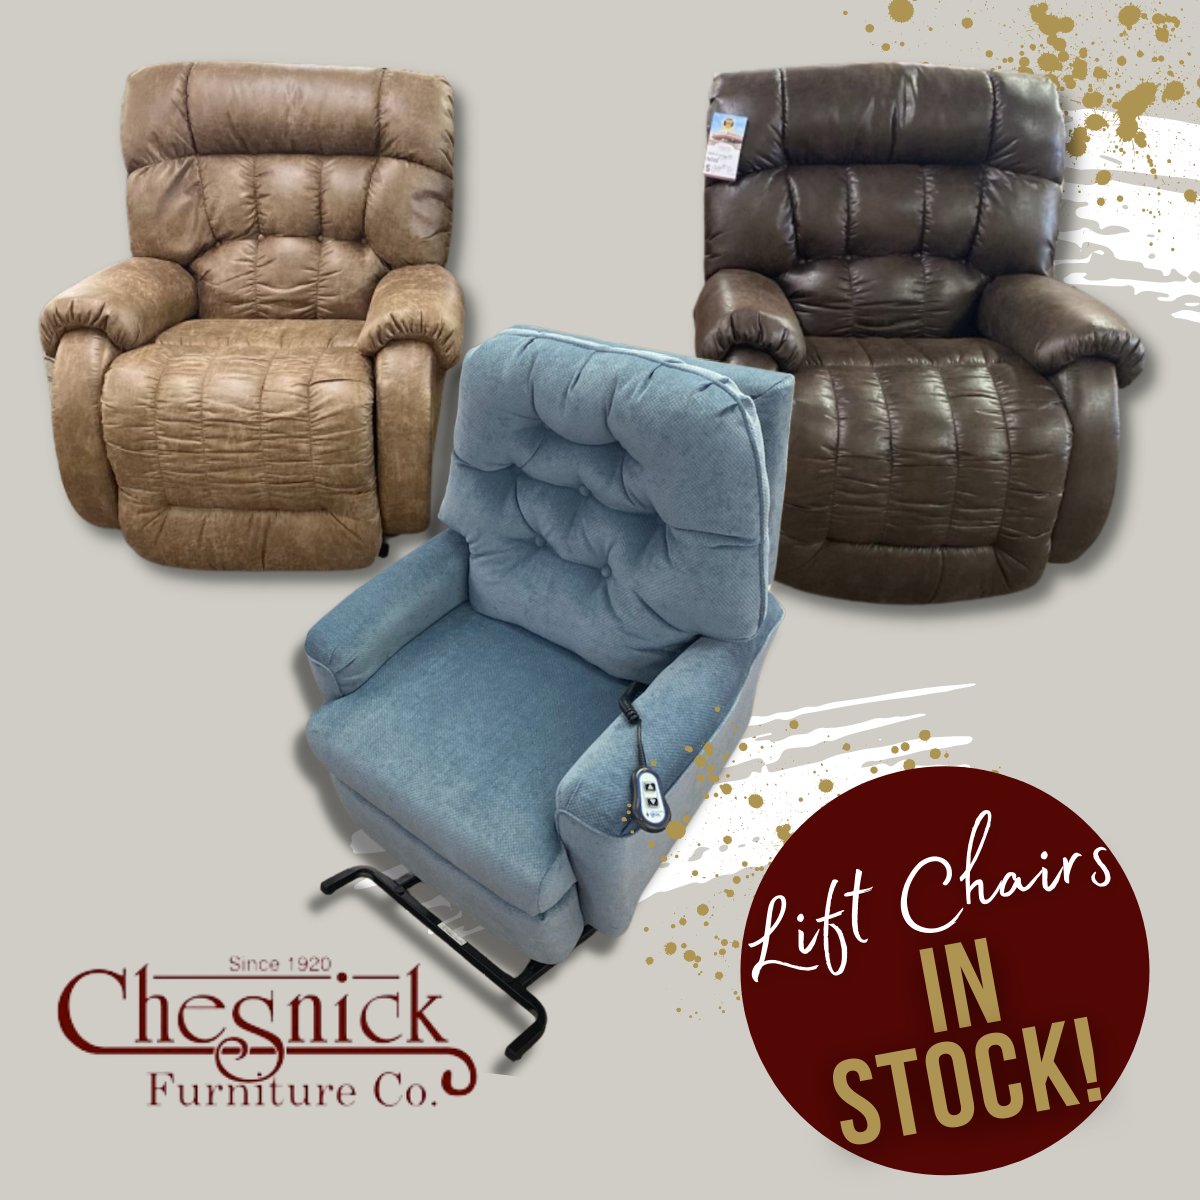 New Lift Chair inventory has arrived on the showroom floor! 
Free delivery within Victoria County & Free Financing for qualified items. 
Upgrade your level of comfort today! 

#Chesnicks #LiftChairs #VictoriaTexas